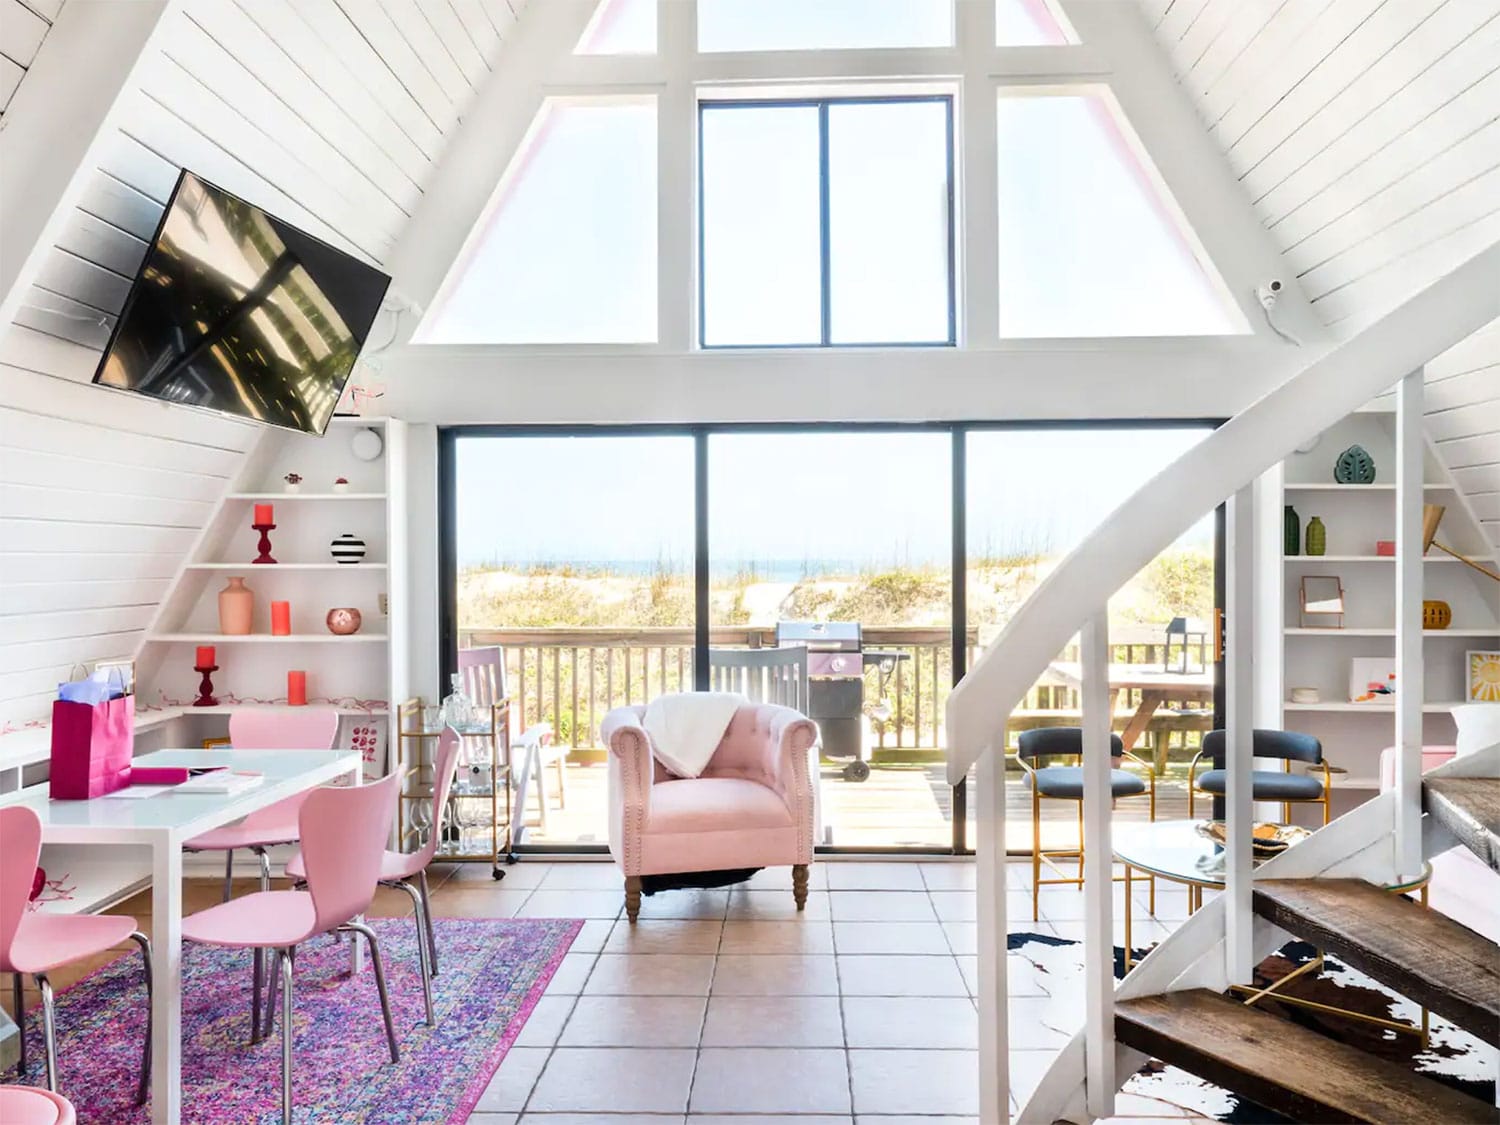 An Airbnb home with pink furnishings.